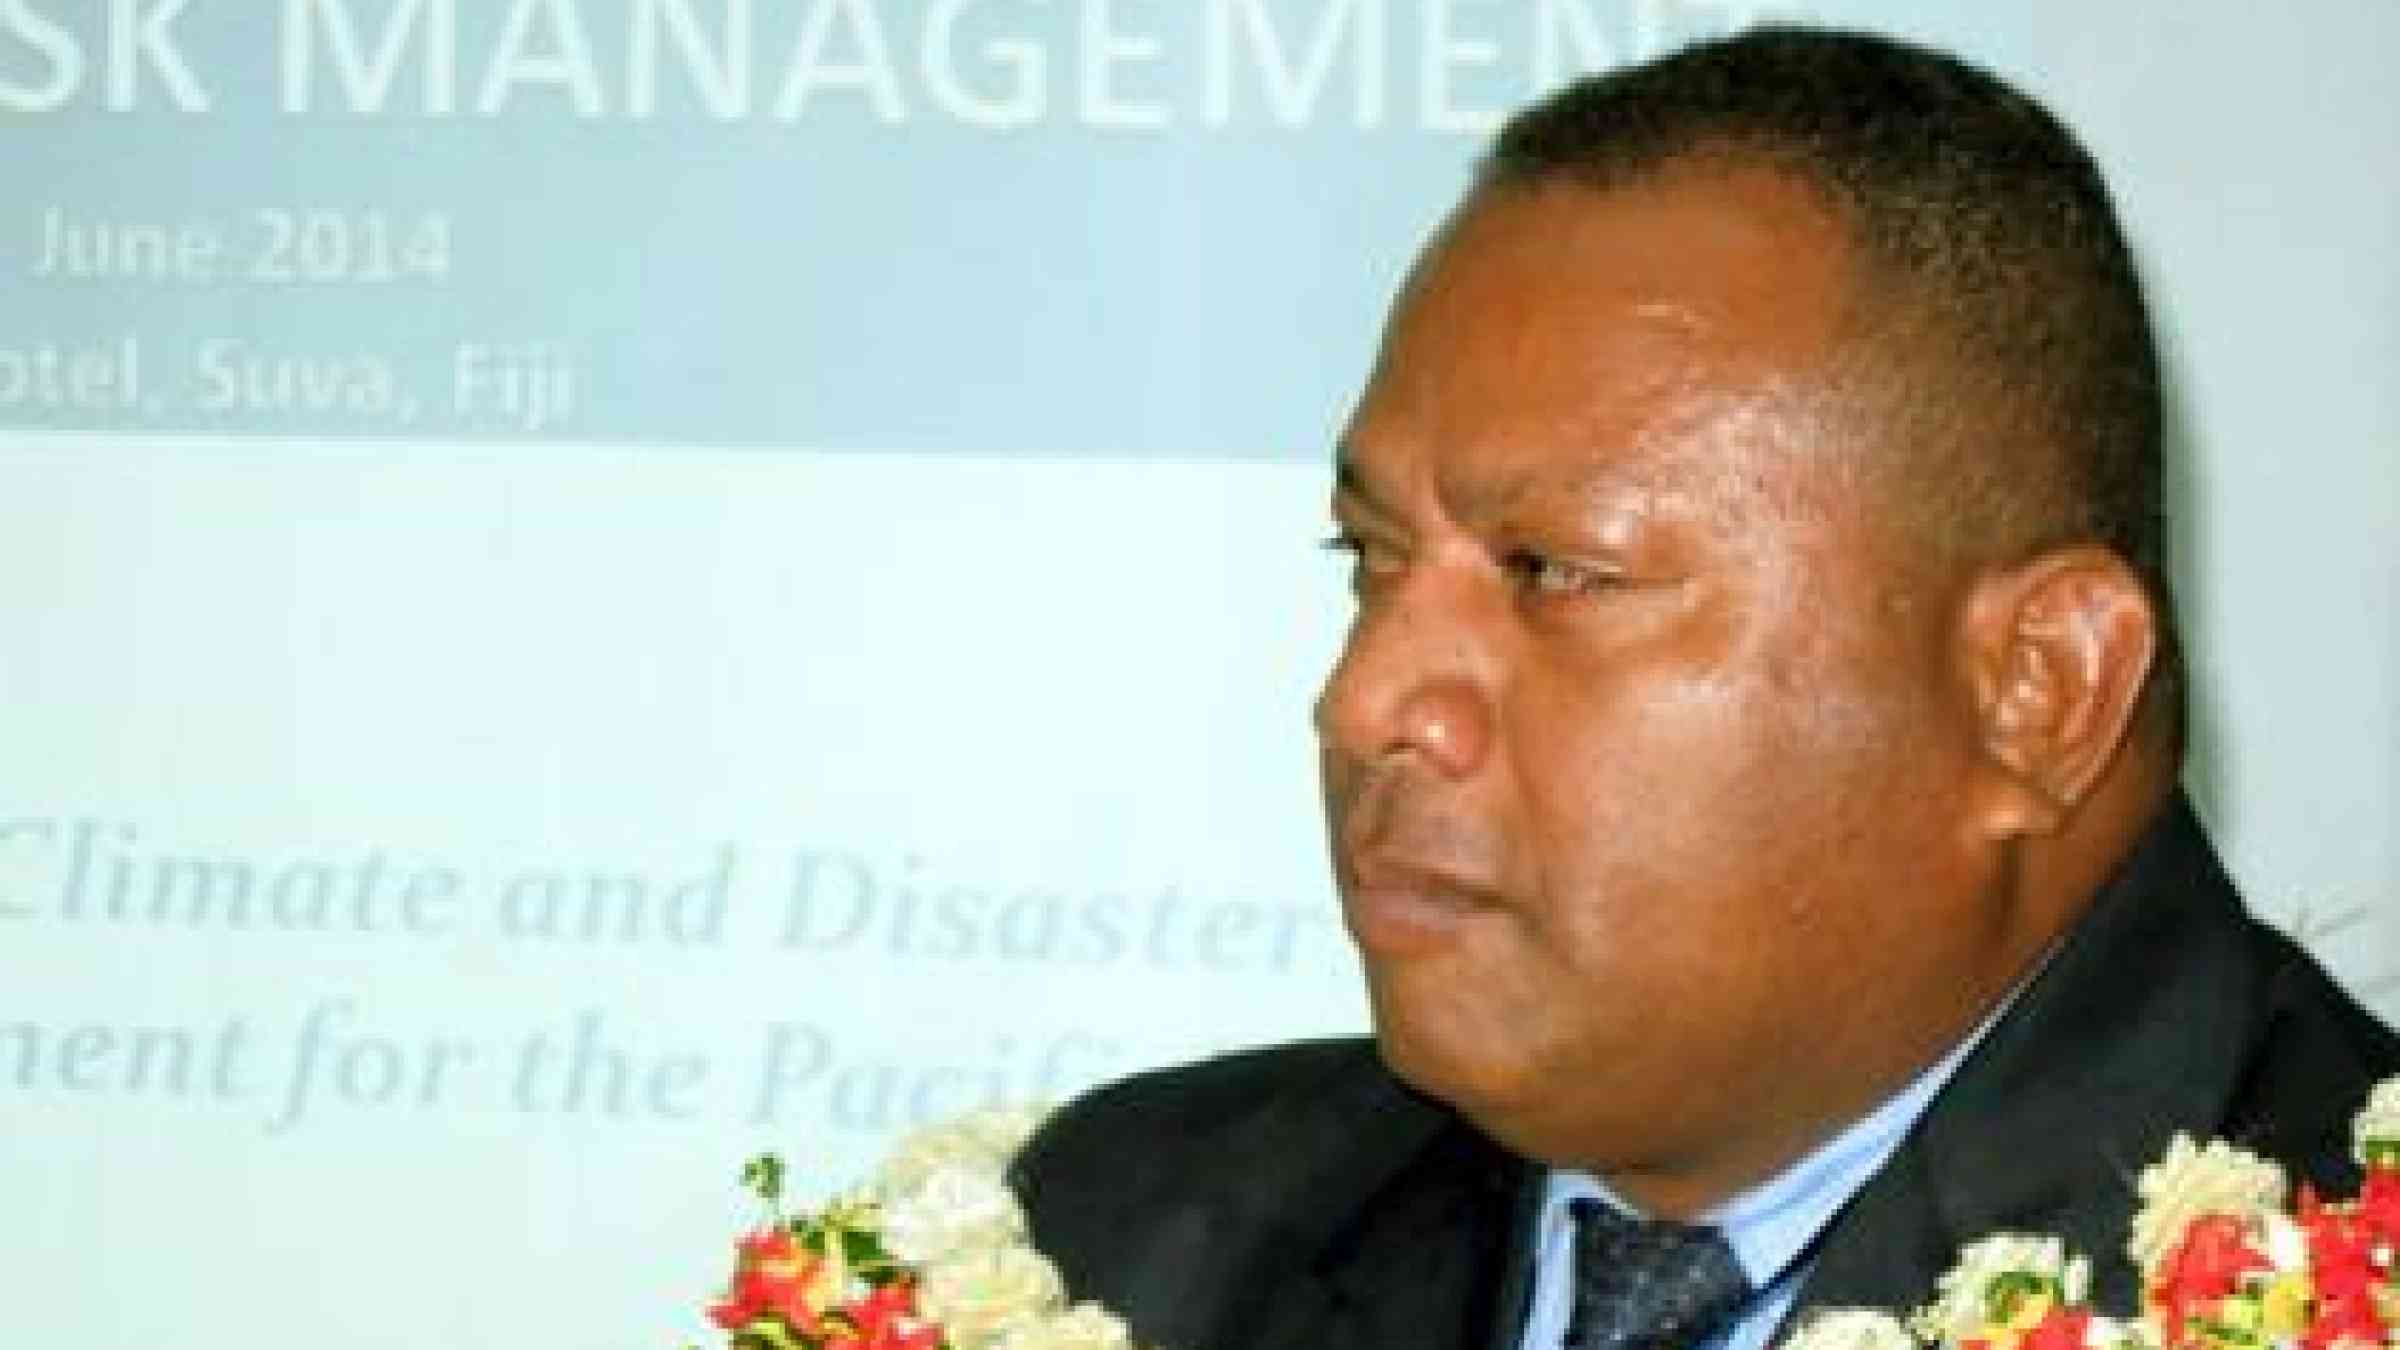 Fiji Minister Seruiratu said the Pacific deserves its place among the world’s best in terms of integrating disaster risk and climate change strategies. (Photo: UNISDR)